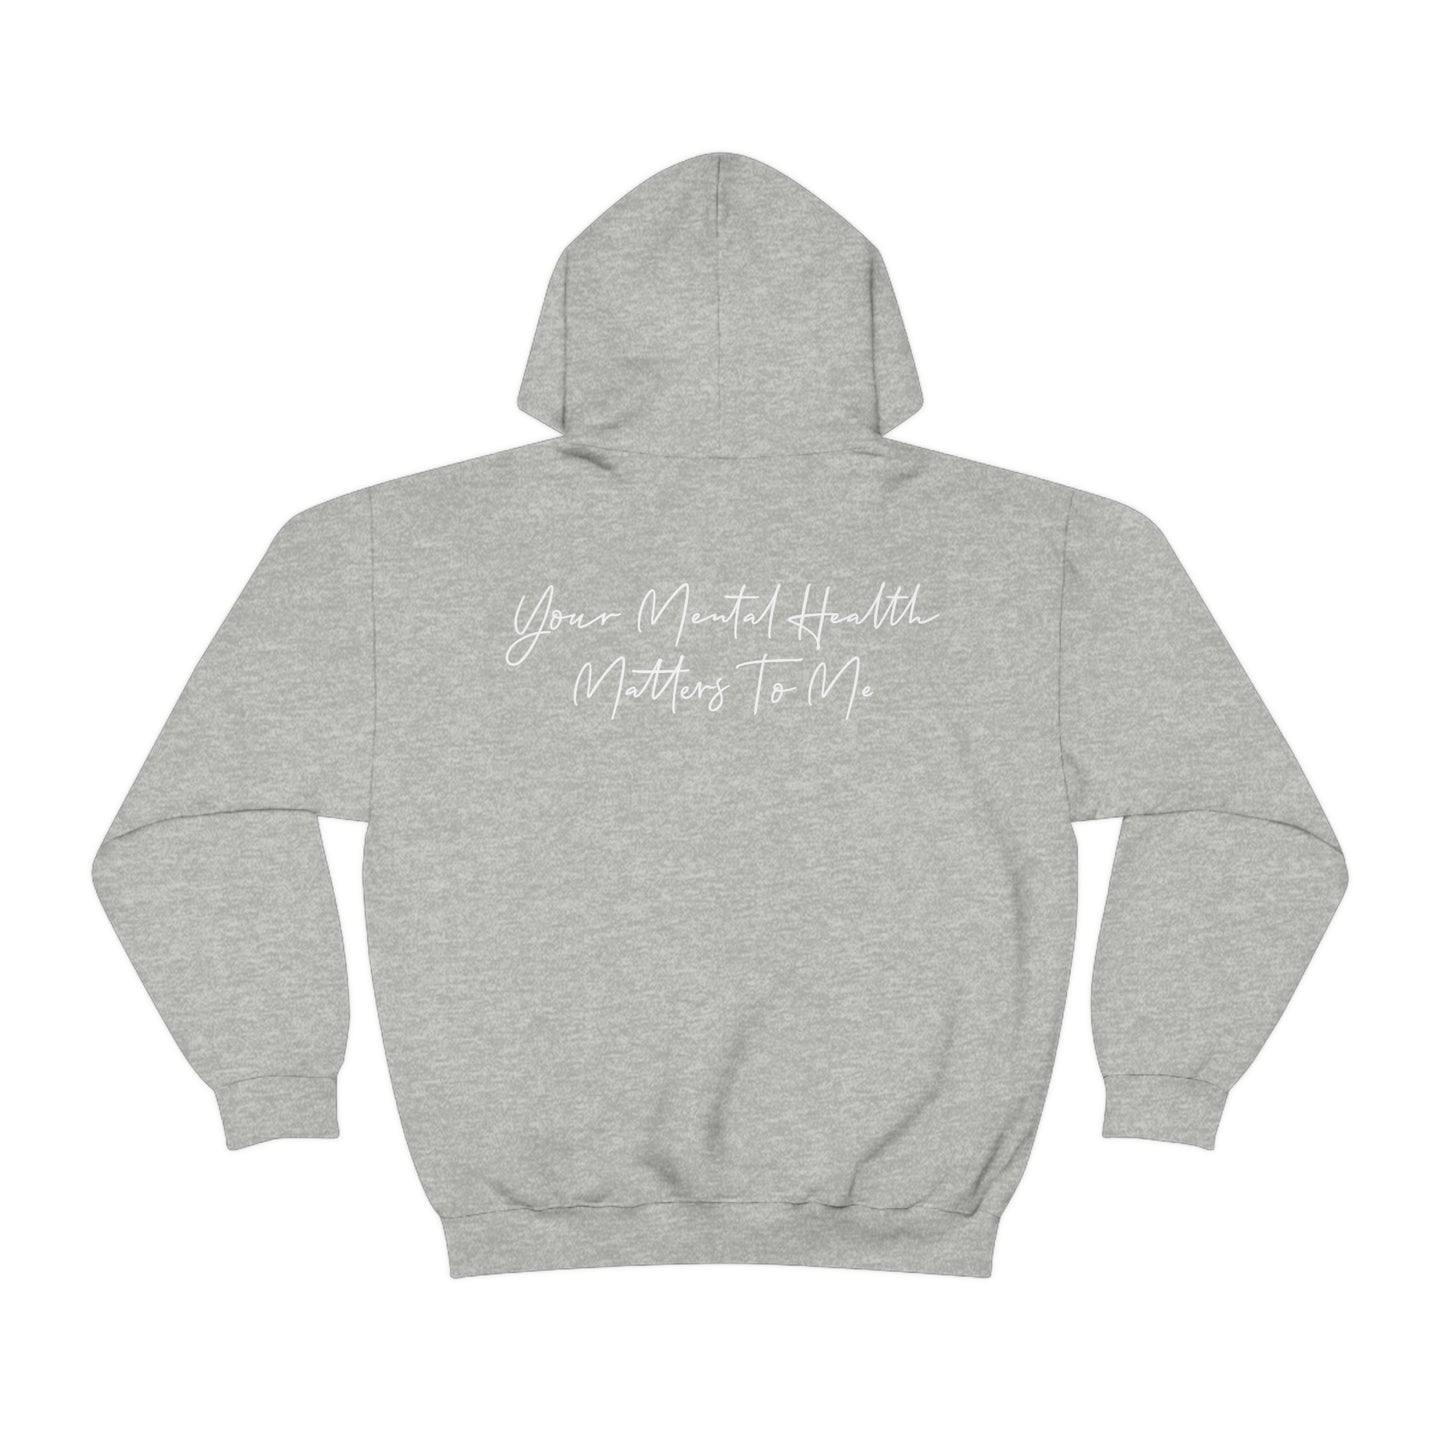 Alissa Humphrey: Your Mental Health Matter To Me Hoodie